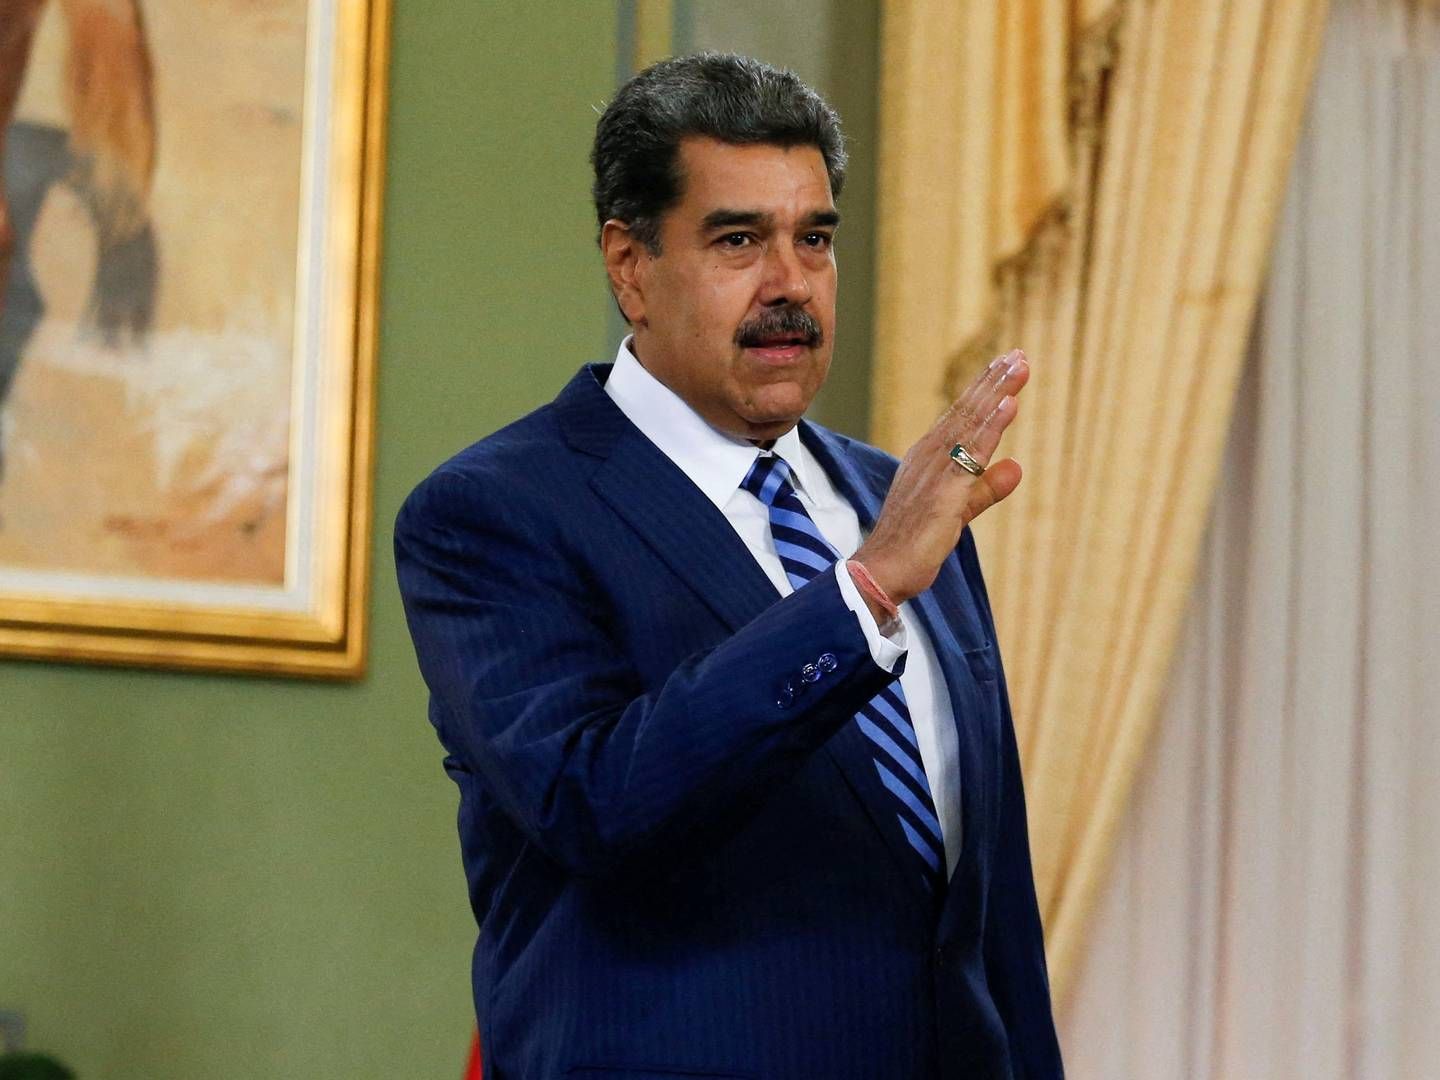 The last presidential election in Venezuela was in 2018. Nicolas Maduro's victory at the time is considered fraud by the US and the international community. | Photo: Leonardo Fernandez Viloria/Reuters/Ritzau Scanpix